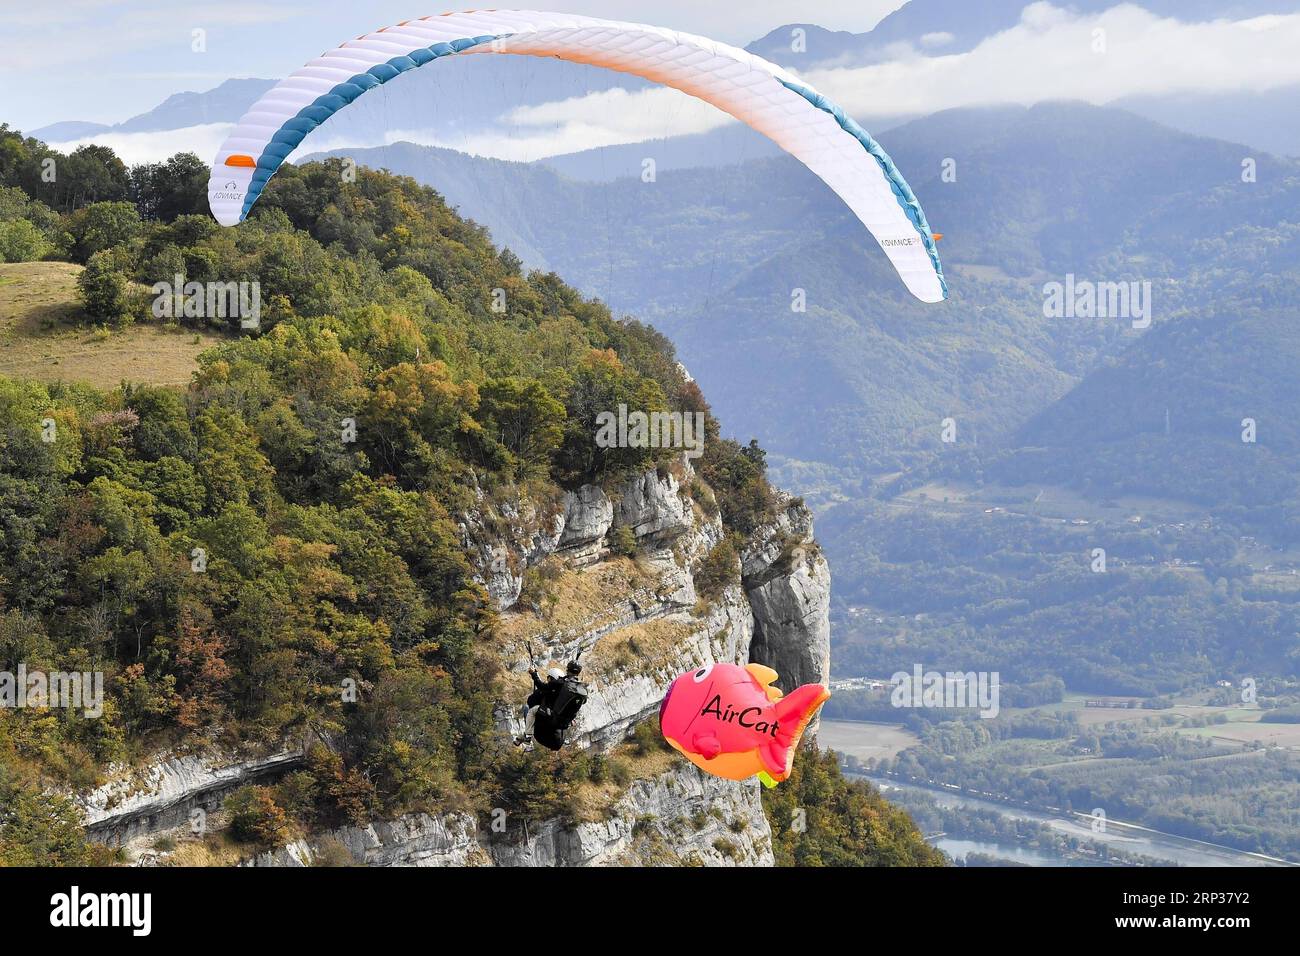 (180924) -- SAINT-HILAIRE, Sept. 24, 2018 (Xinhua) -- A pilot practices a disguised flight in Saint-Hilaire, France on Sept. 22, 2018. The four-day air sports festival, Coupe Icare, concluded on Sunday. On its 45th edition, the Coupe Icare this year attracted about 700 accredited pilots and over 90,000 spectators. (Xinhua/Chen Yichen) (SP)FRANCE-SAINT-HILAIRE-AIR SPORTS-45TH COUPE ICARE PUBLICATIONxNOTxINxCHN Stock Photo